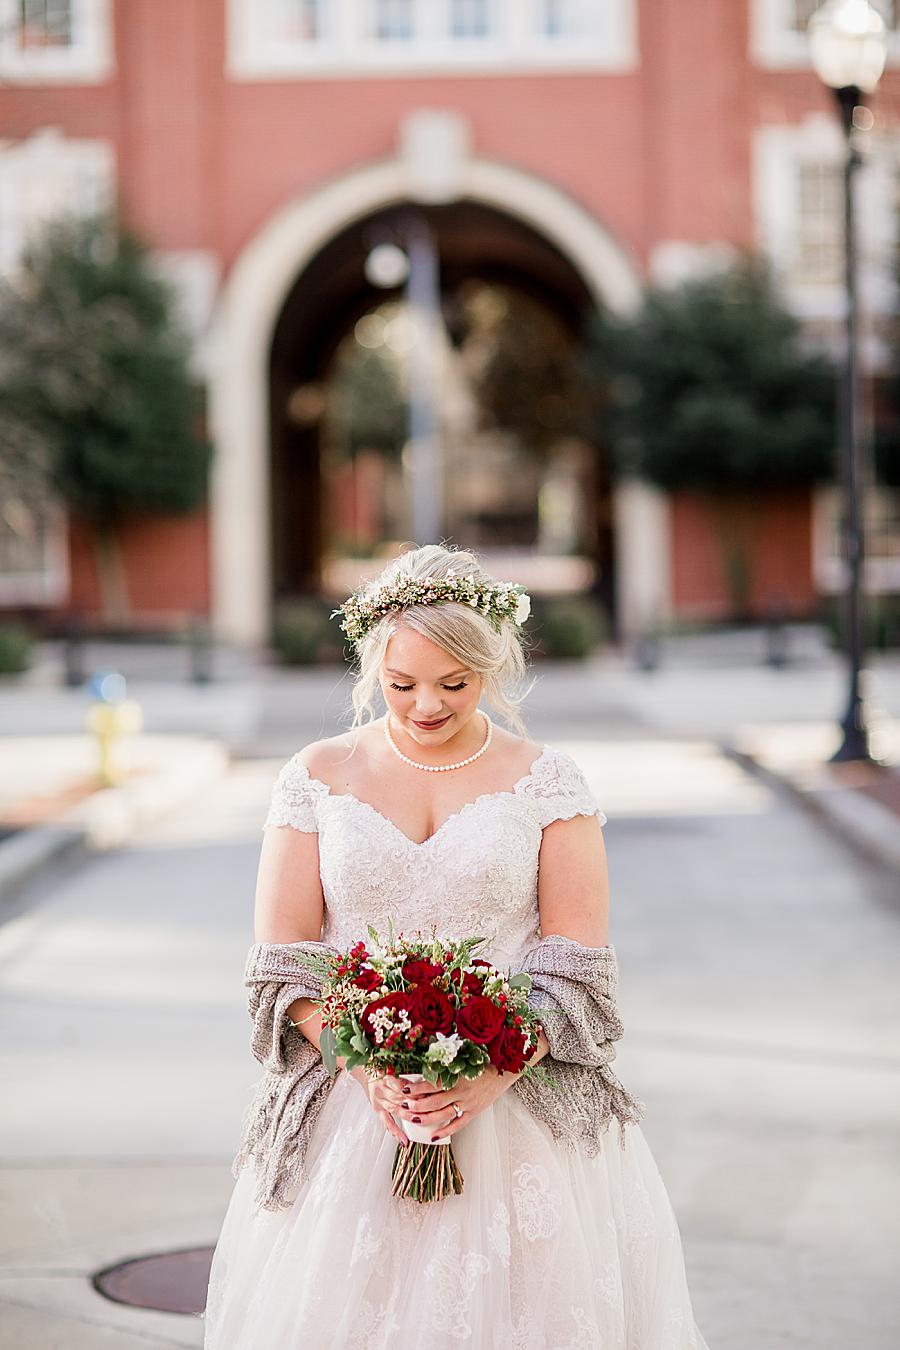 Winter bridal bouquet at this The Foundry Wedding by Knoxville Wedding Photographer, Amanda May Photos.